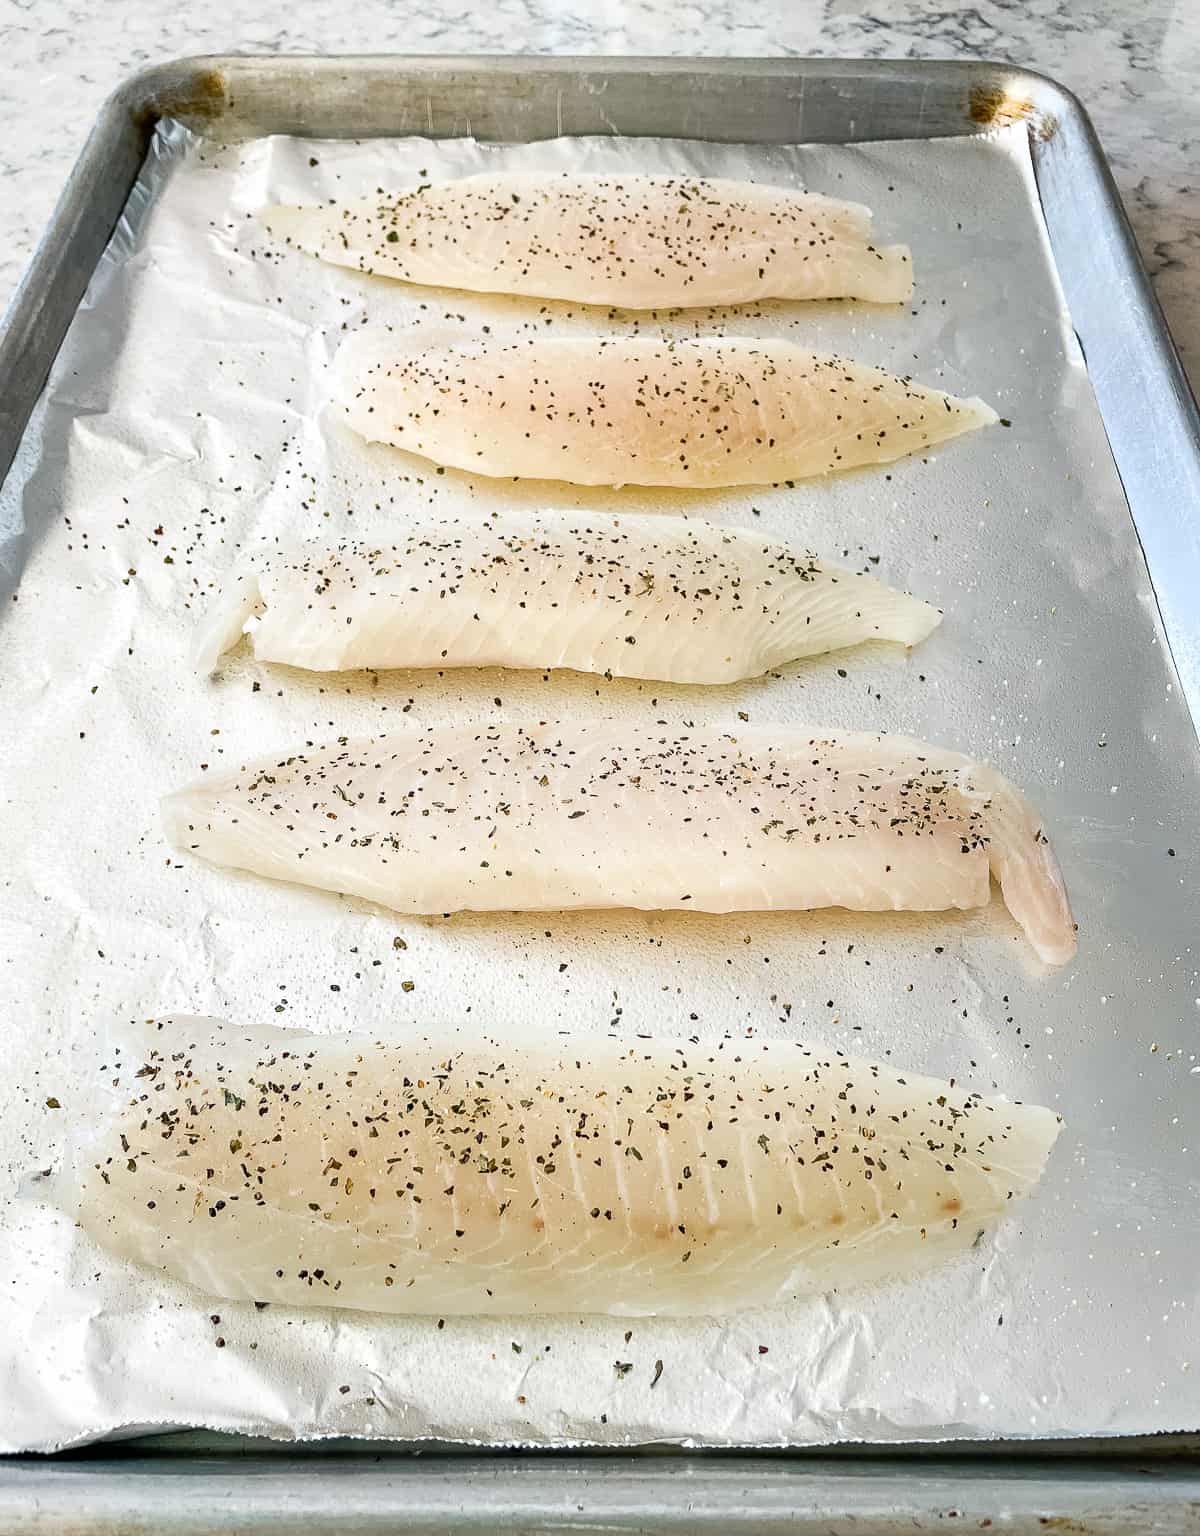 uncooked tilapia on a foil lined baking sheet